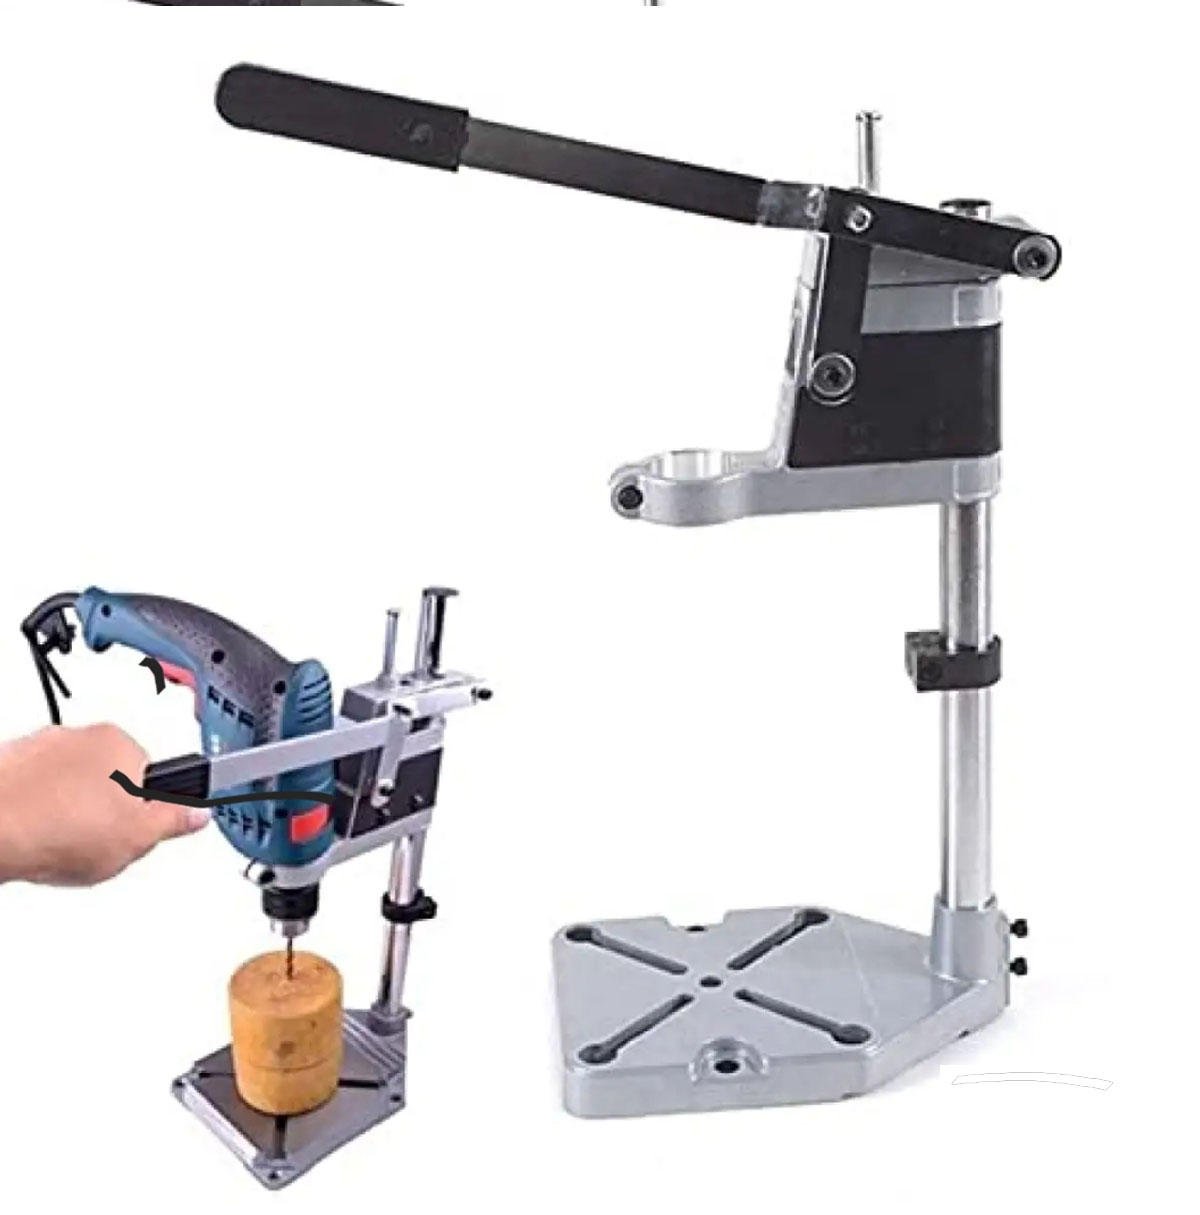 Bench Clamp Drill Press Stand drill stand